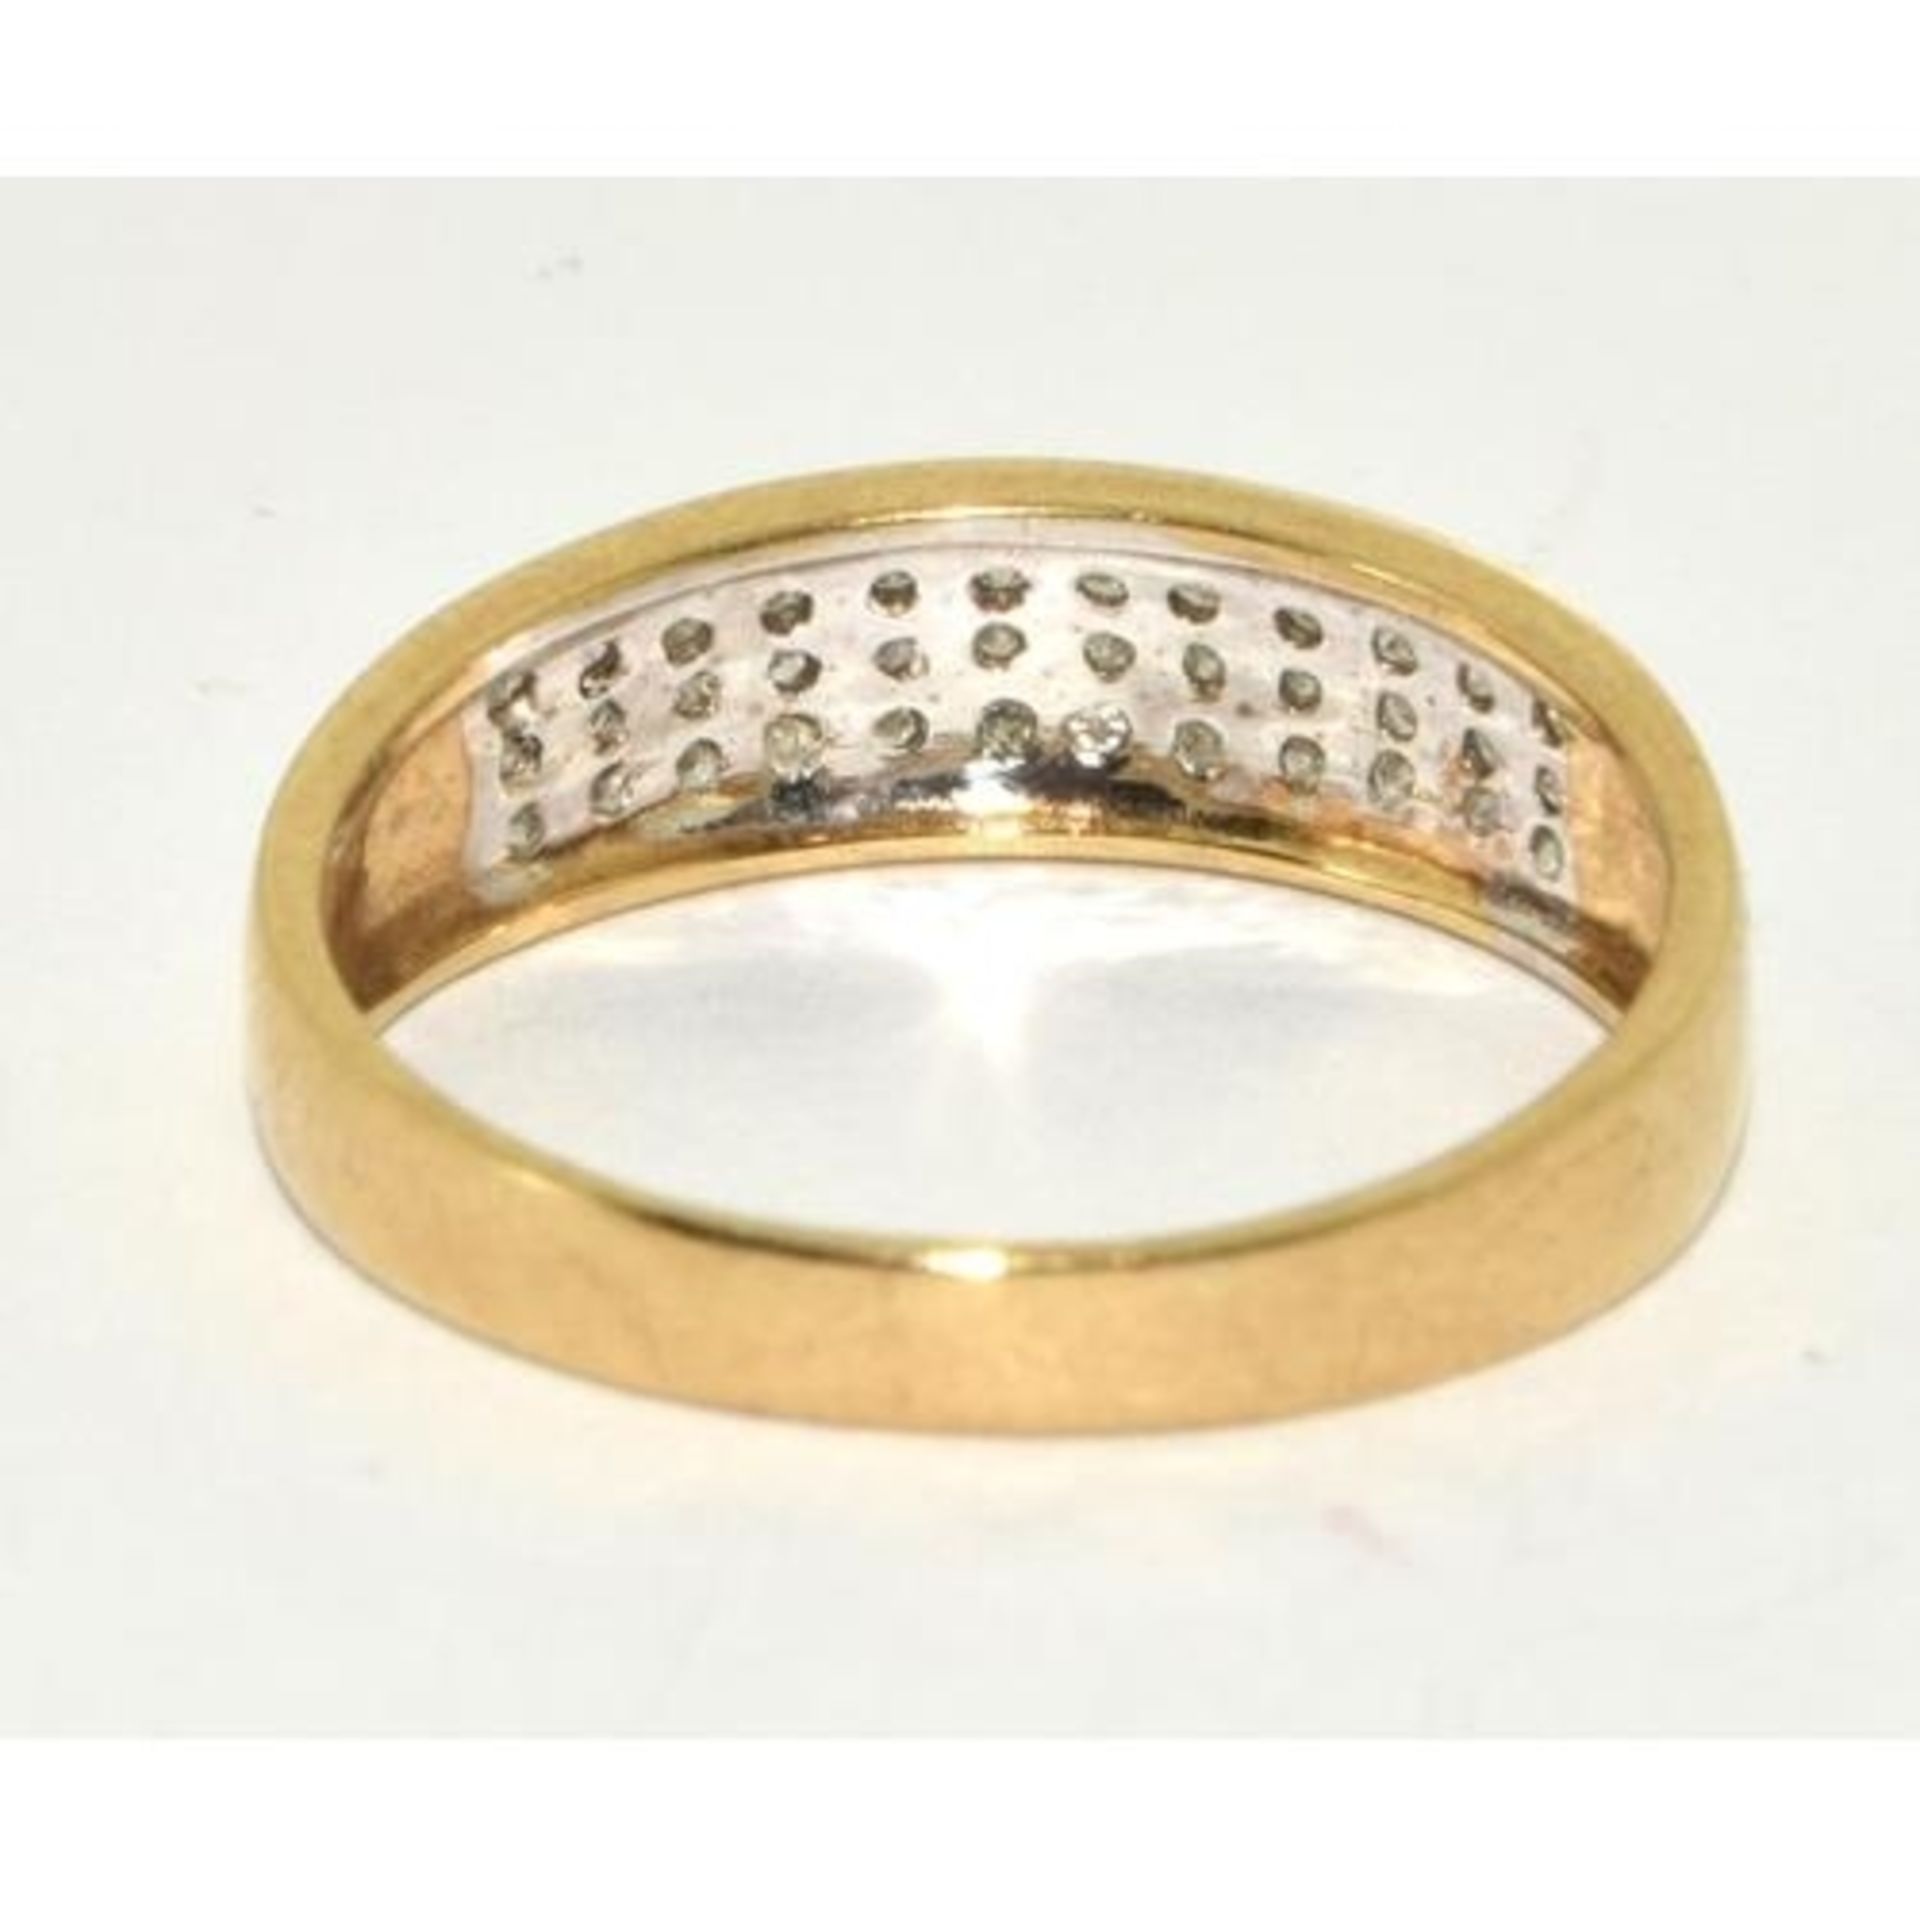 9ct gold ladies diamond ring hallmarked in the ring as 0.25 ct size T - Image 3 of 5